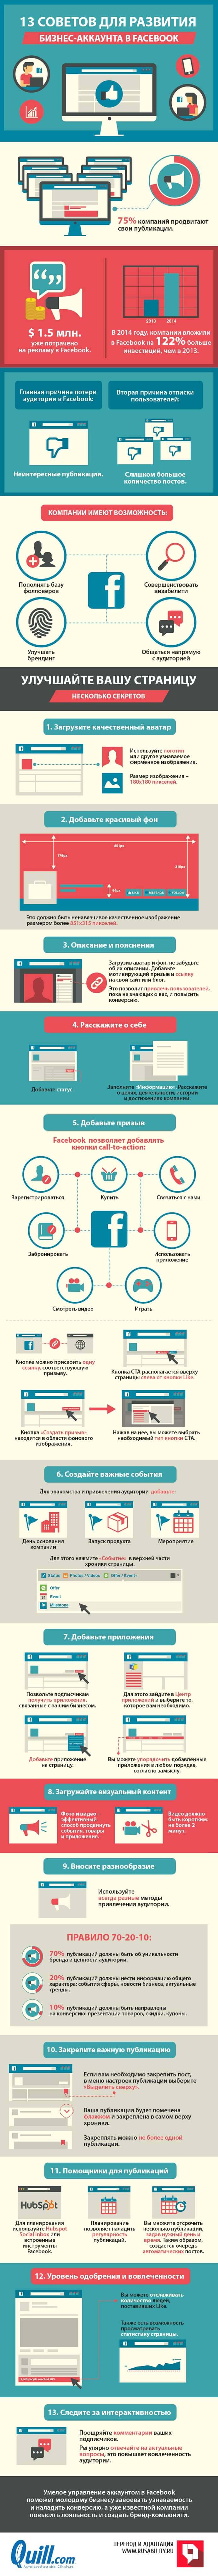 facebook-business-page-tips-infographic-rusability